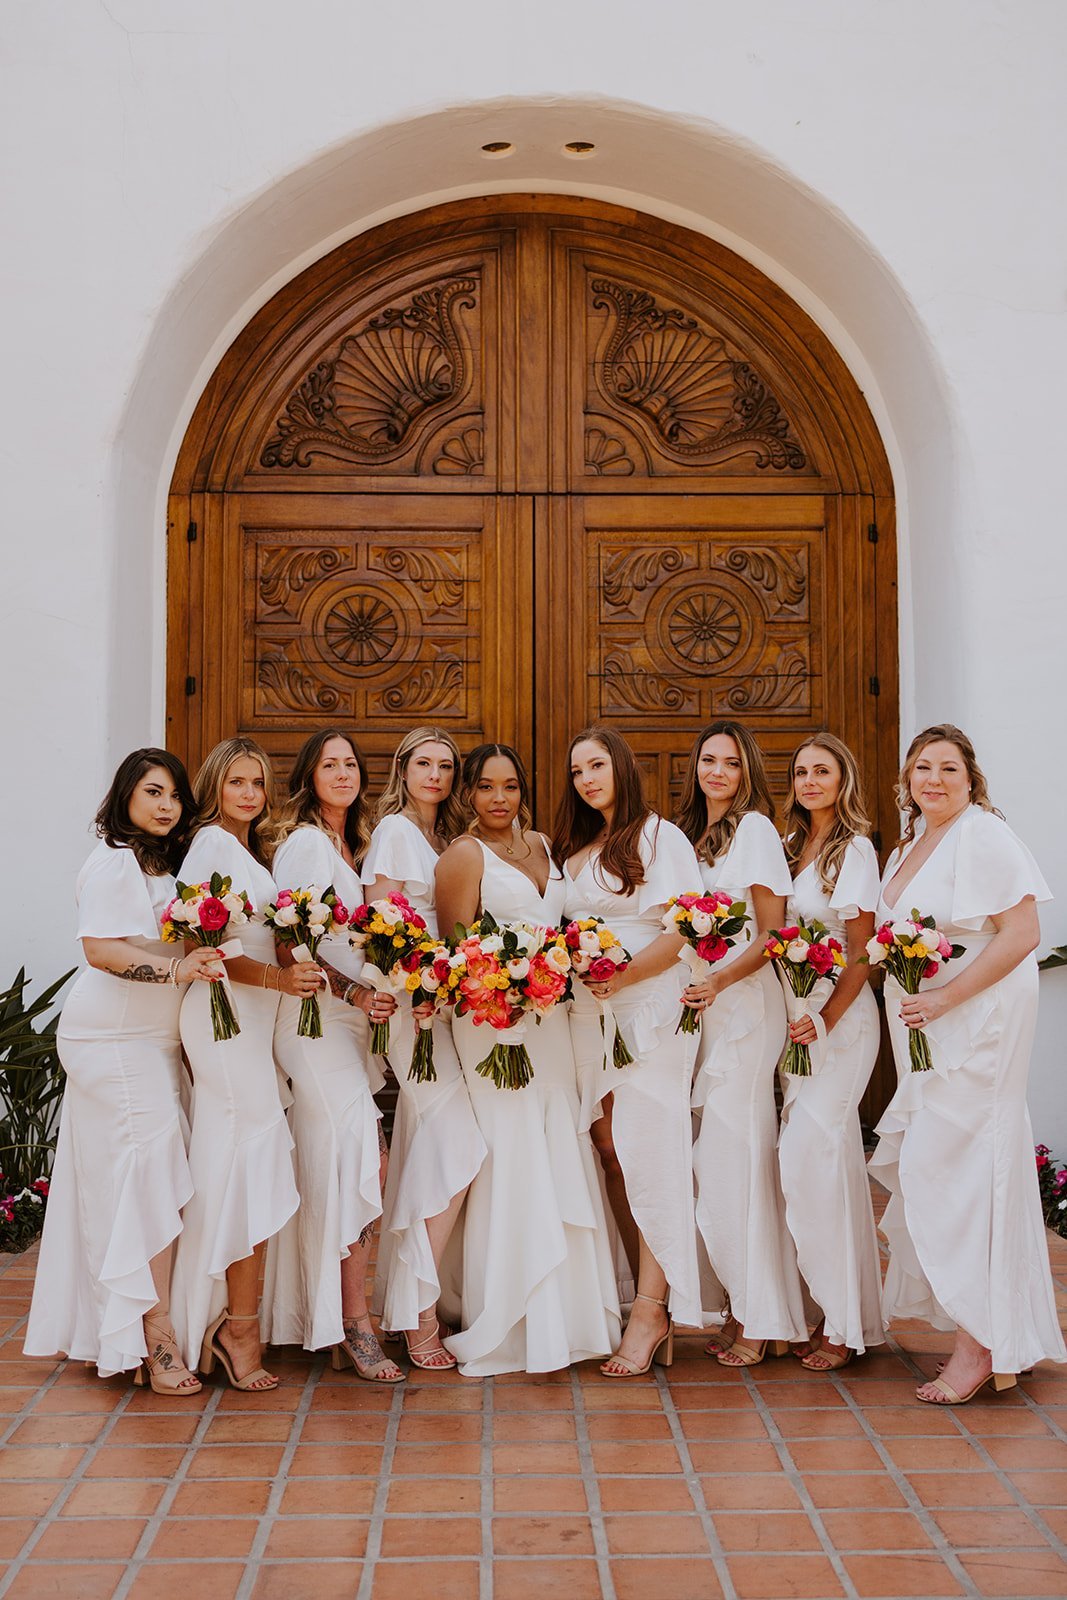 White bridesmaid dresses at La Quinta Resort wedding in Palm Springs | Photo by Tida Svy